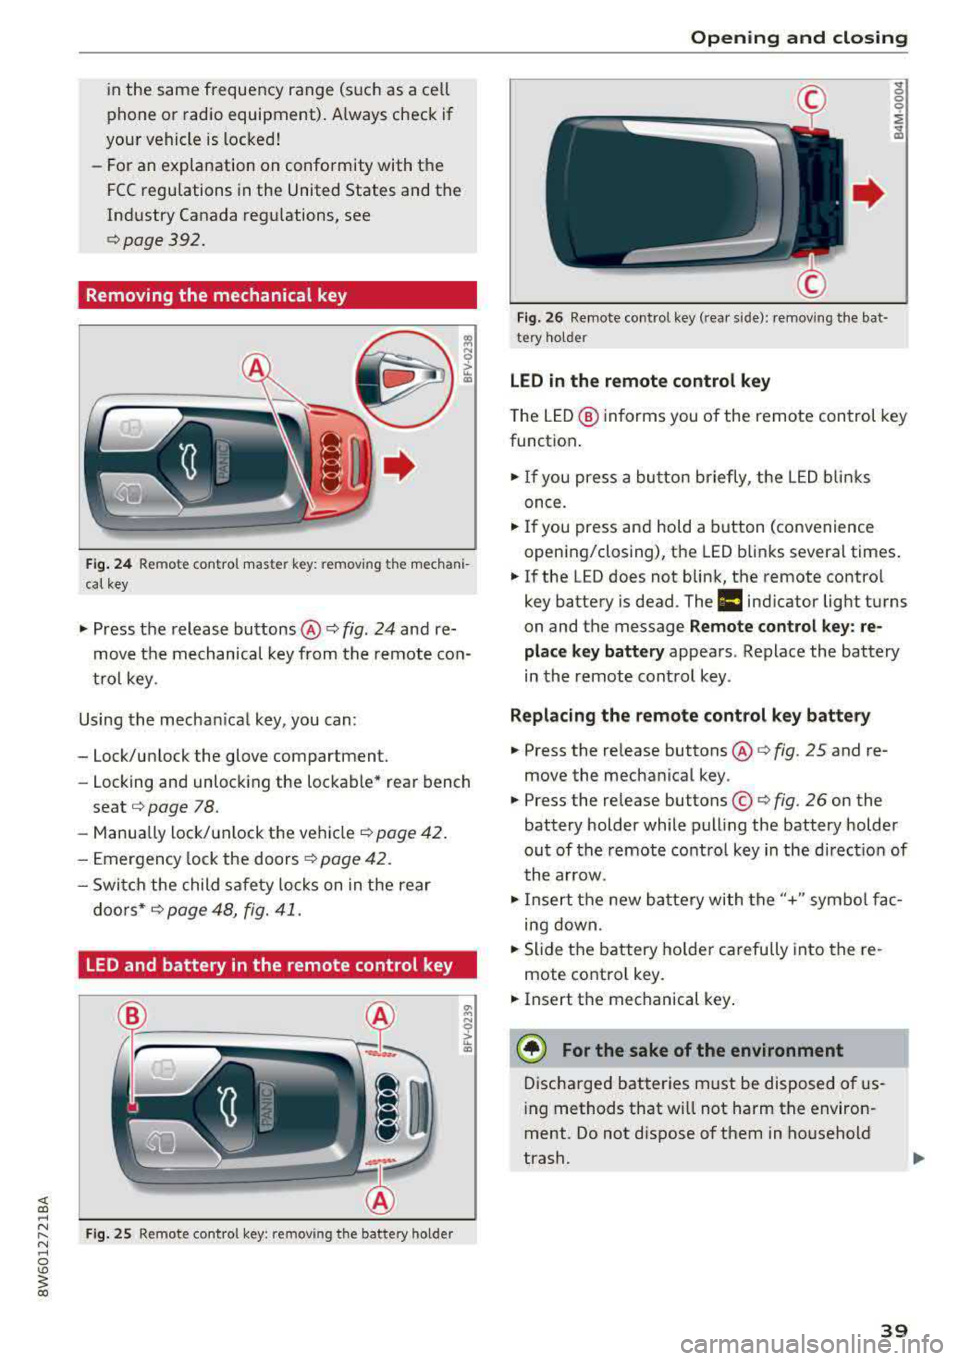 AUDI A5 COUPE 2018  Owners Manual in the  same  frequency  range  (s uch  as  a ce ll 
phone  or  radio  equipment) . A lways  check  if 
your  vehicle  is locked! 
- For  an  explanation  on  conformity  with  t he 
FCC  regulations 